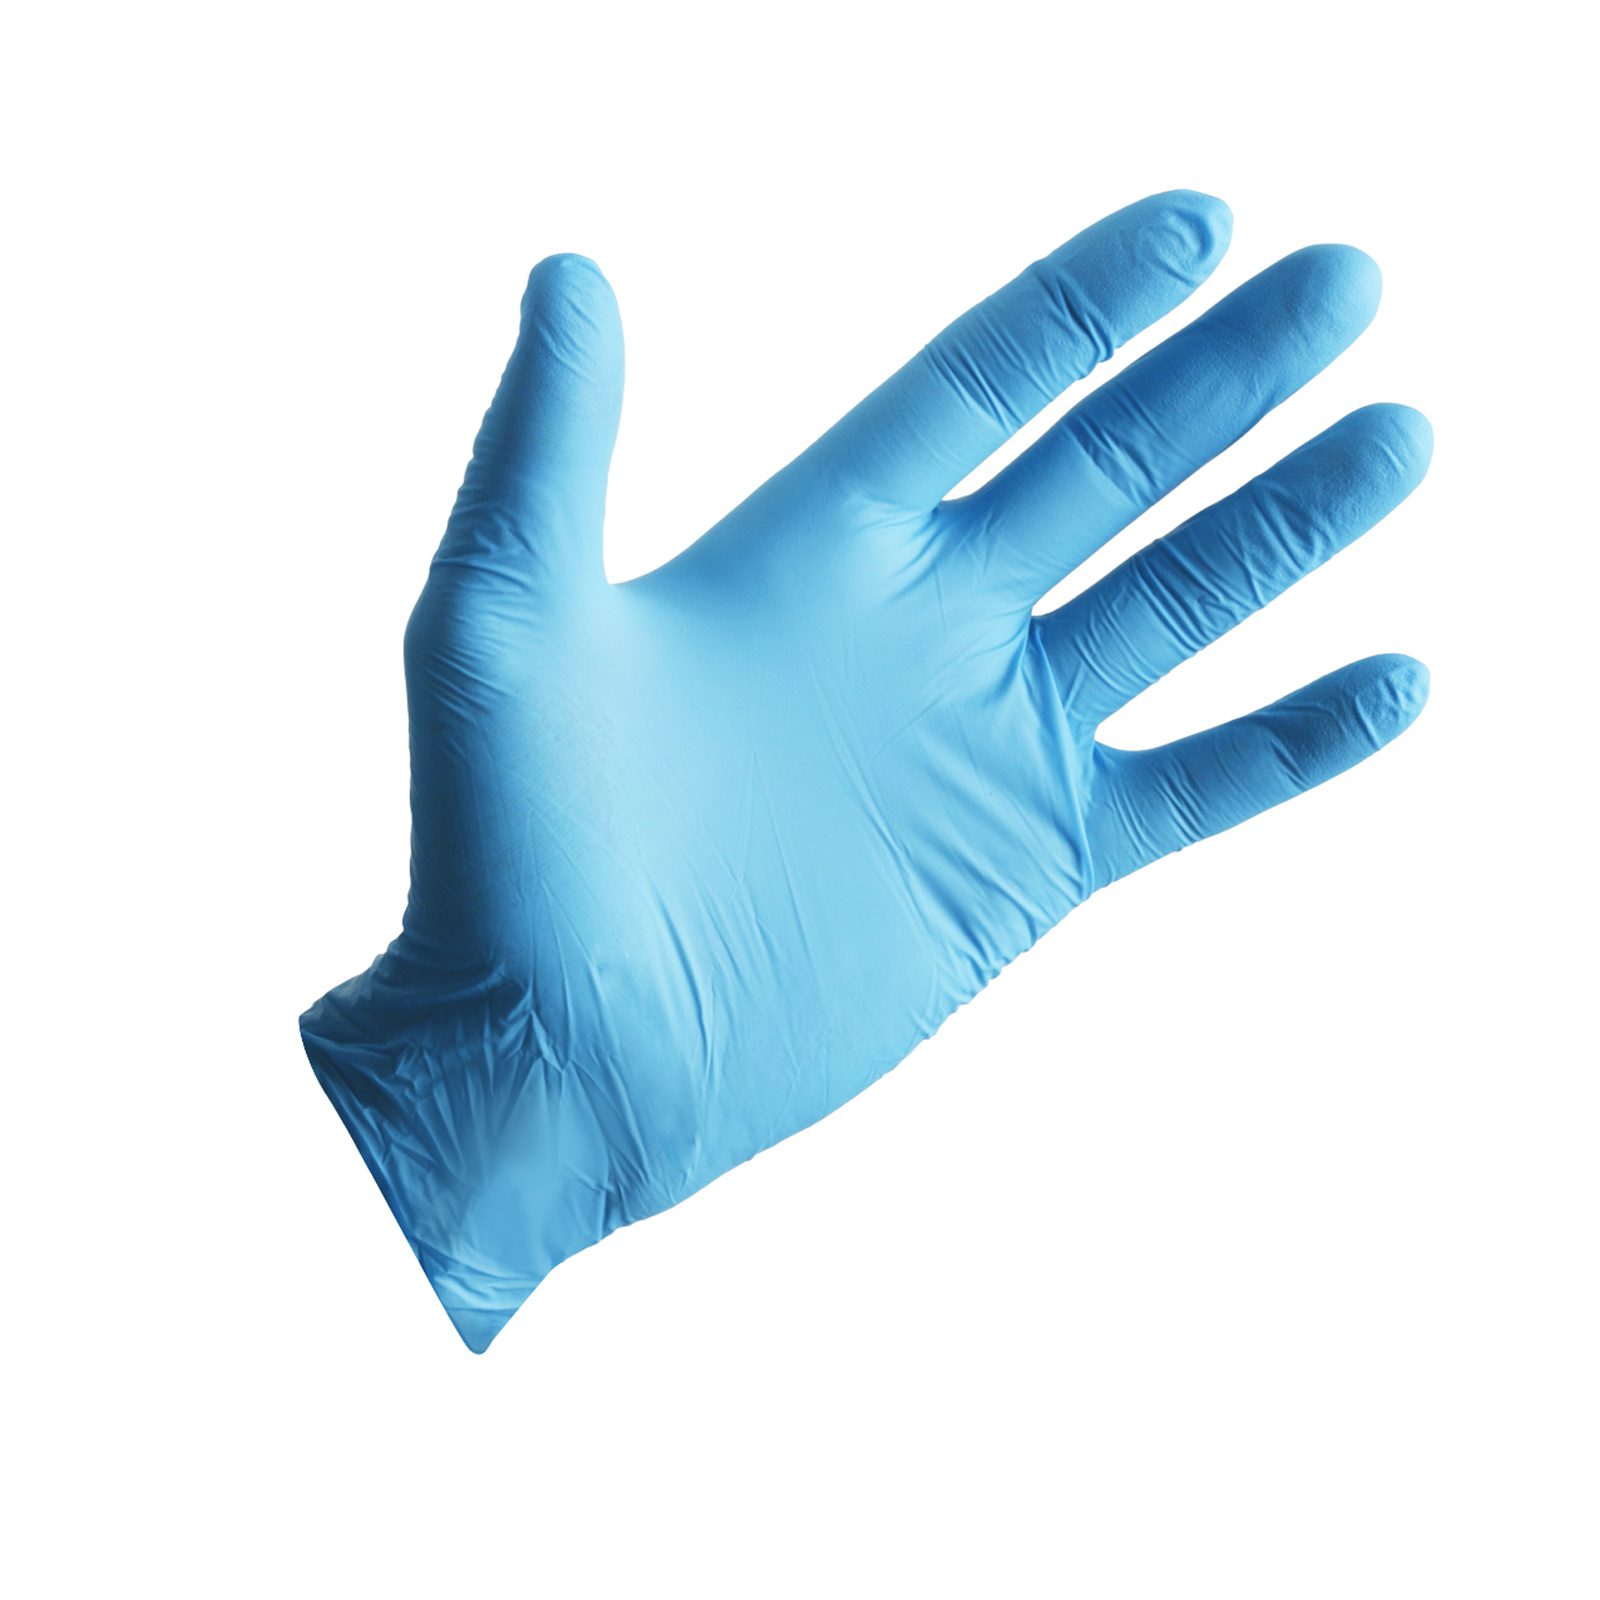 11 Applications of Medical Gloves in Hospital?